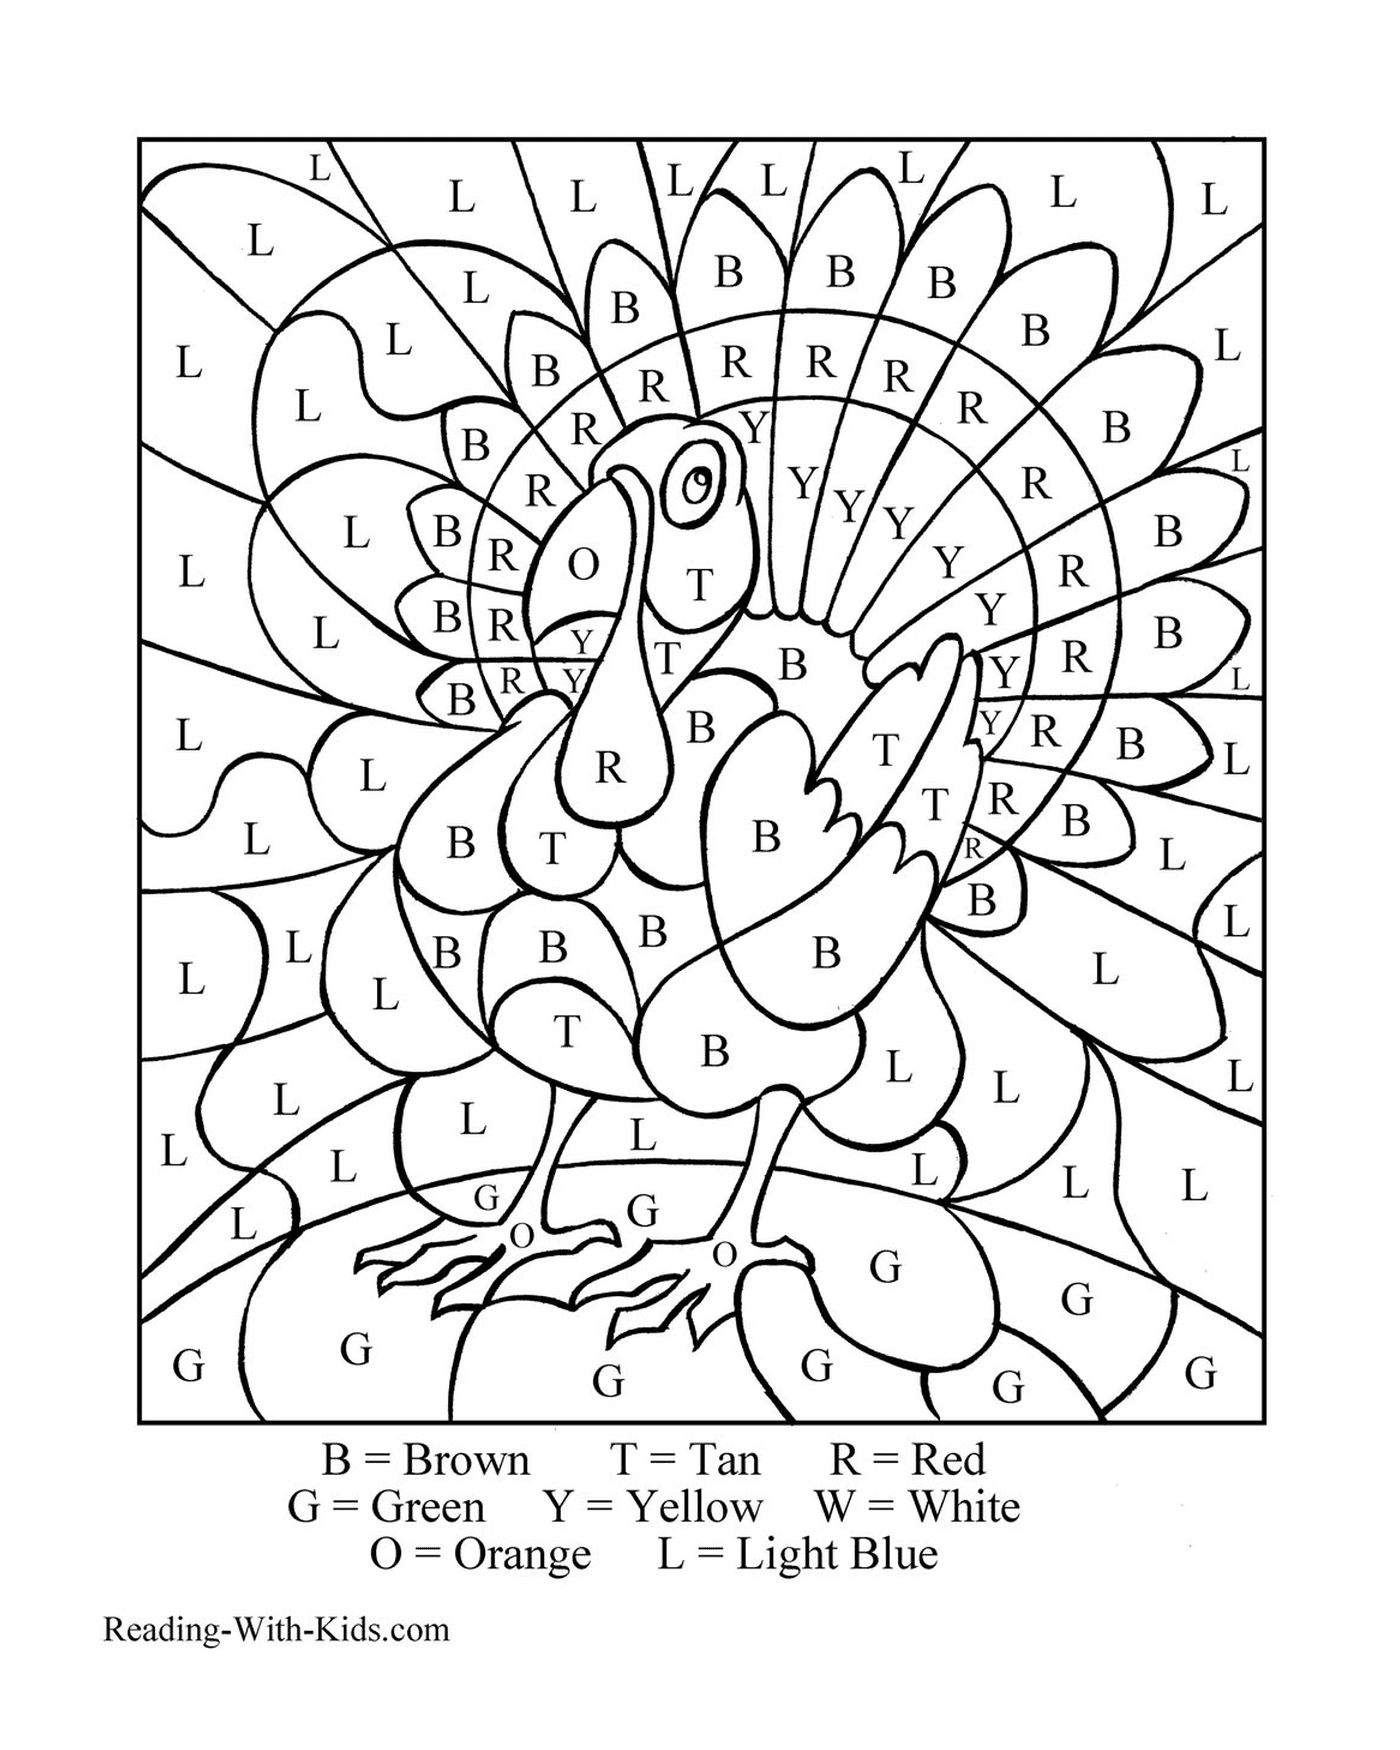  A colouring turkey with letters for the letter B 